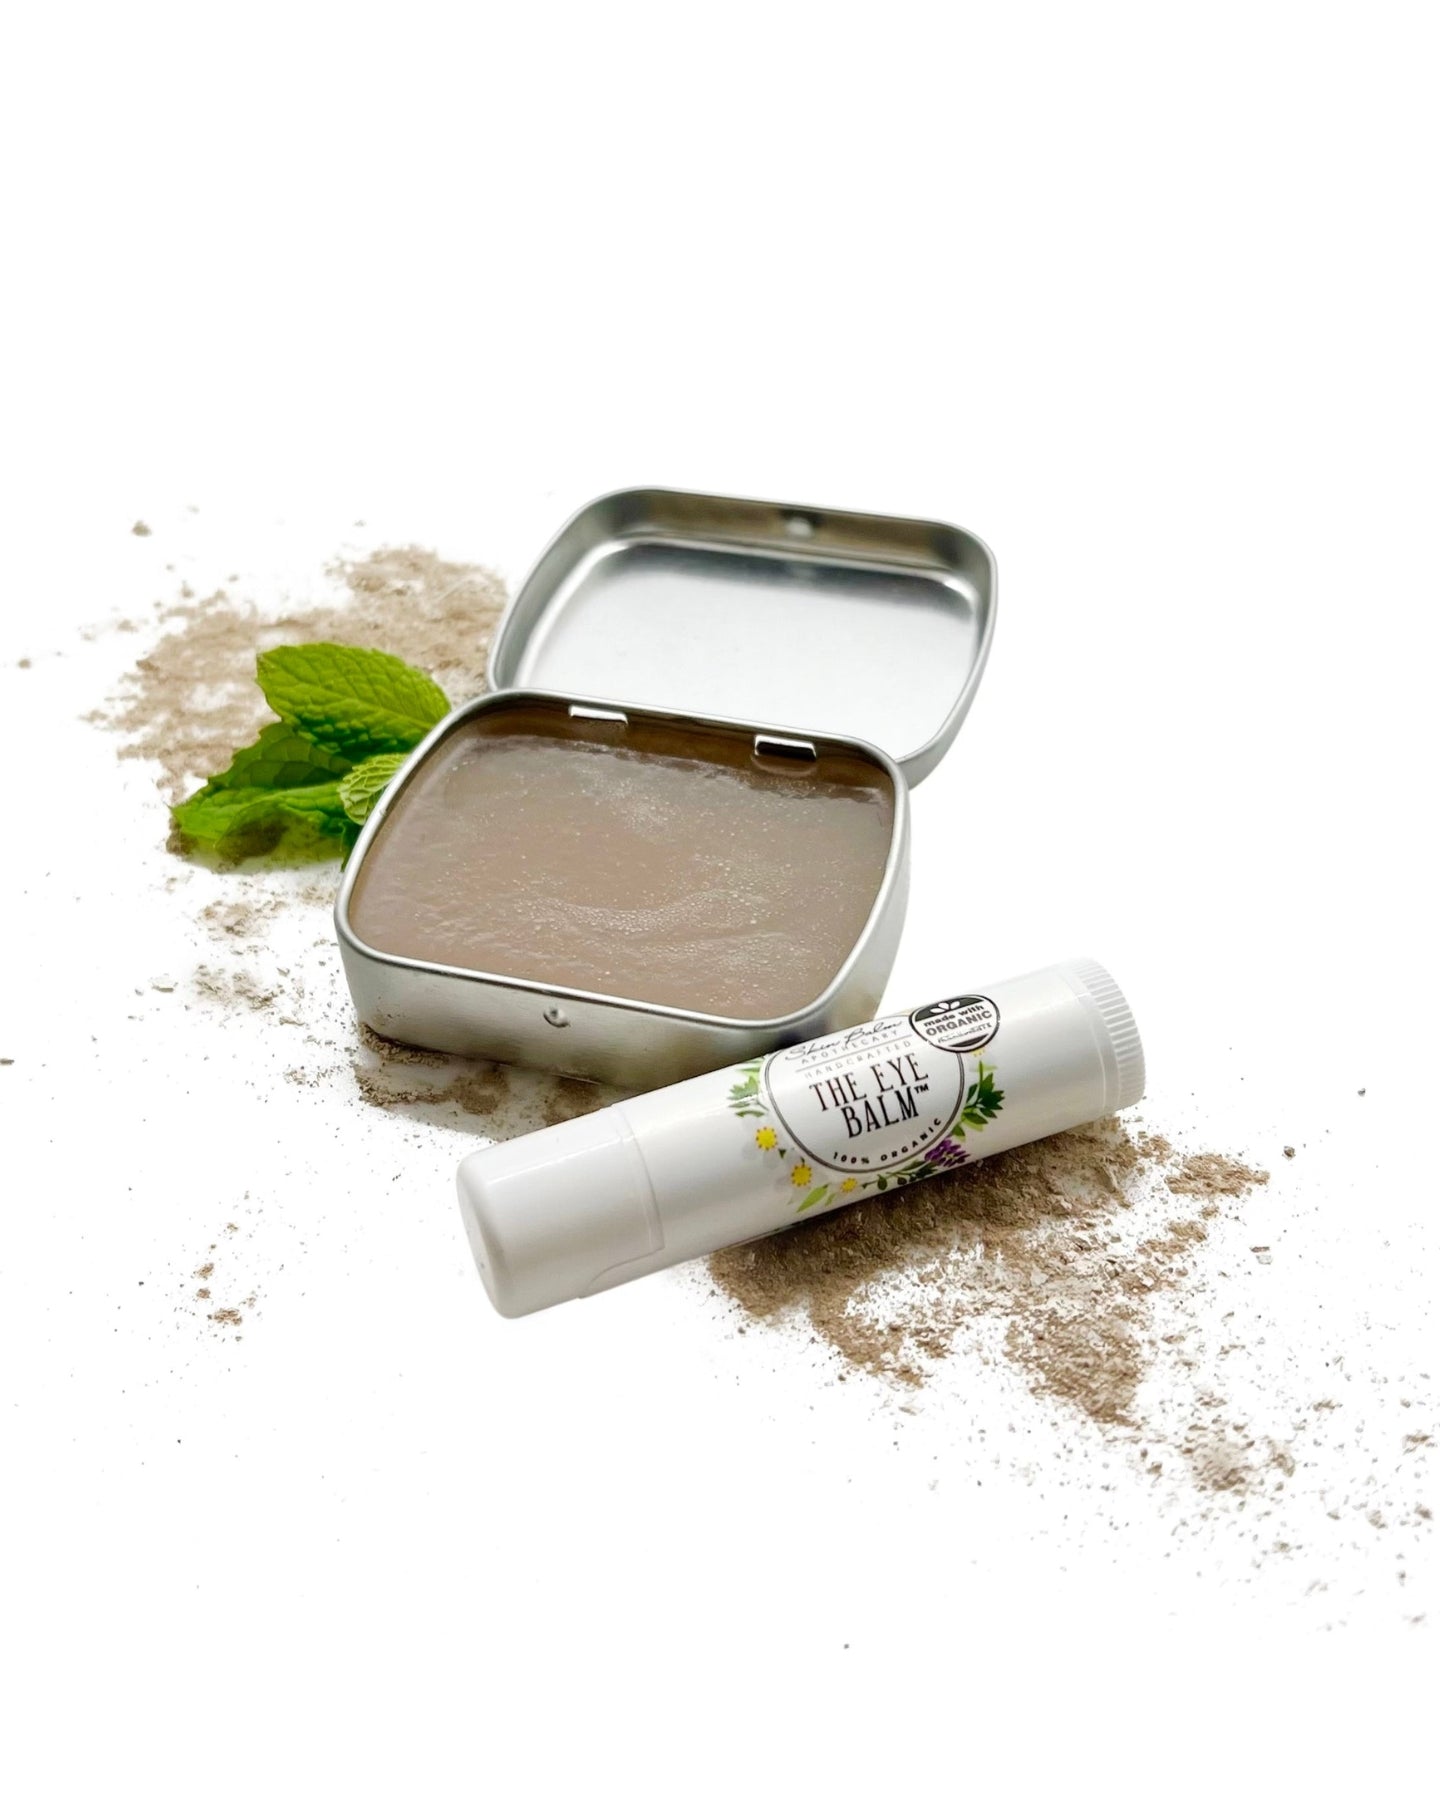 Brow Styling Wax & Clay with The Eye Balm™ against a white background.